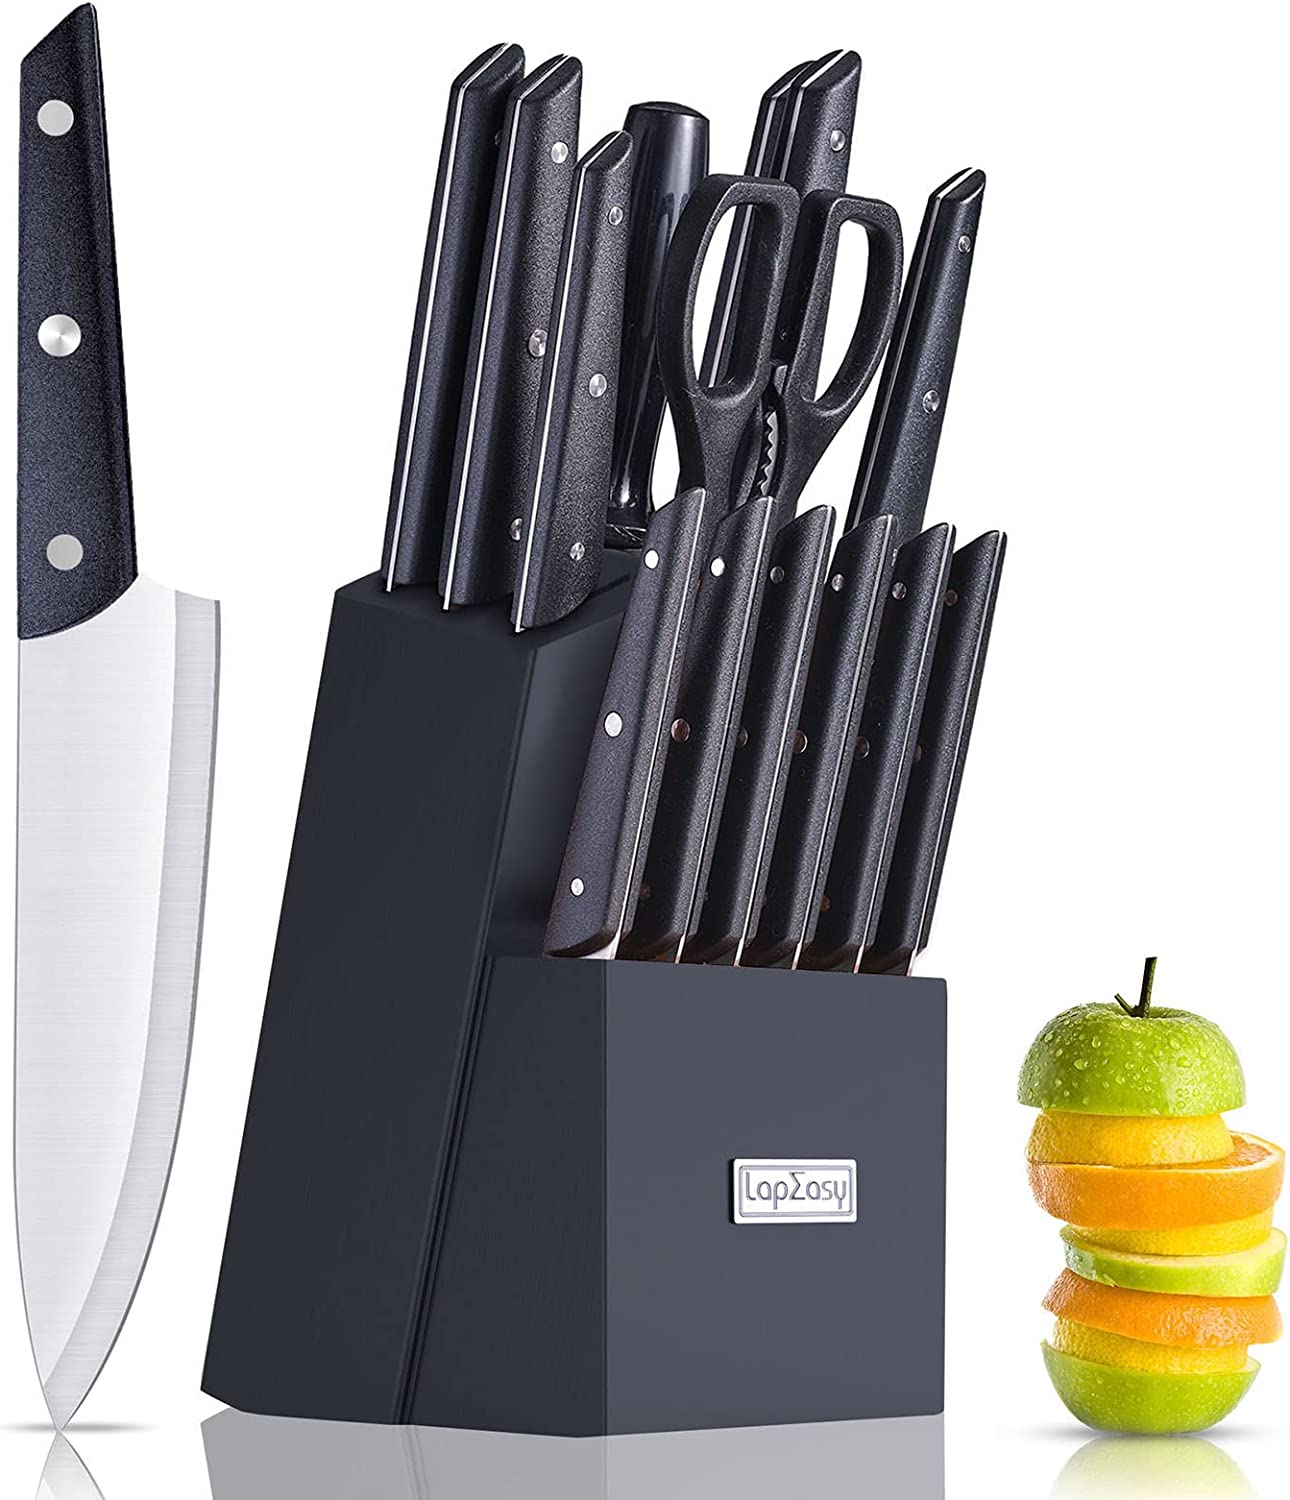 Knife Set With Block,  LapEasy 15 Pieces Kitchen Knife Set With Pine Block Holder, Knife Block Set With Sharpener,  High Stainless Steel Knives With Comfortable-Grip ABS Handles.